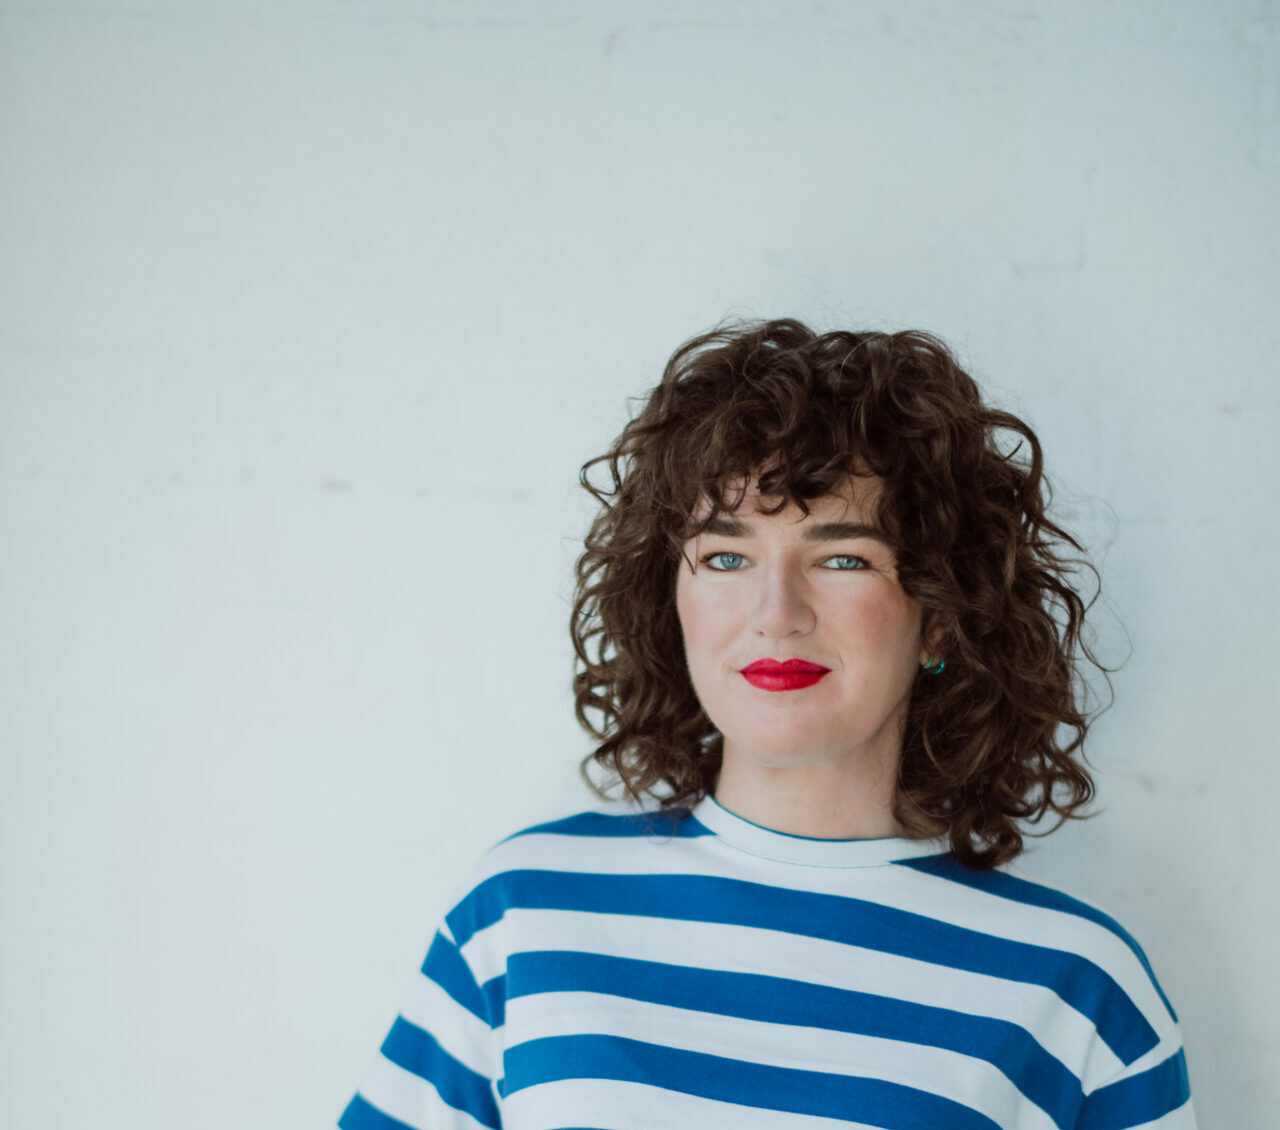 A woman with brown curly hair and bright red lipstick, wearing a striped blue and white shirt, leans against a white background